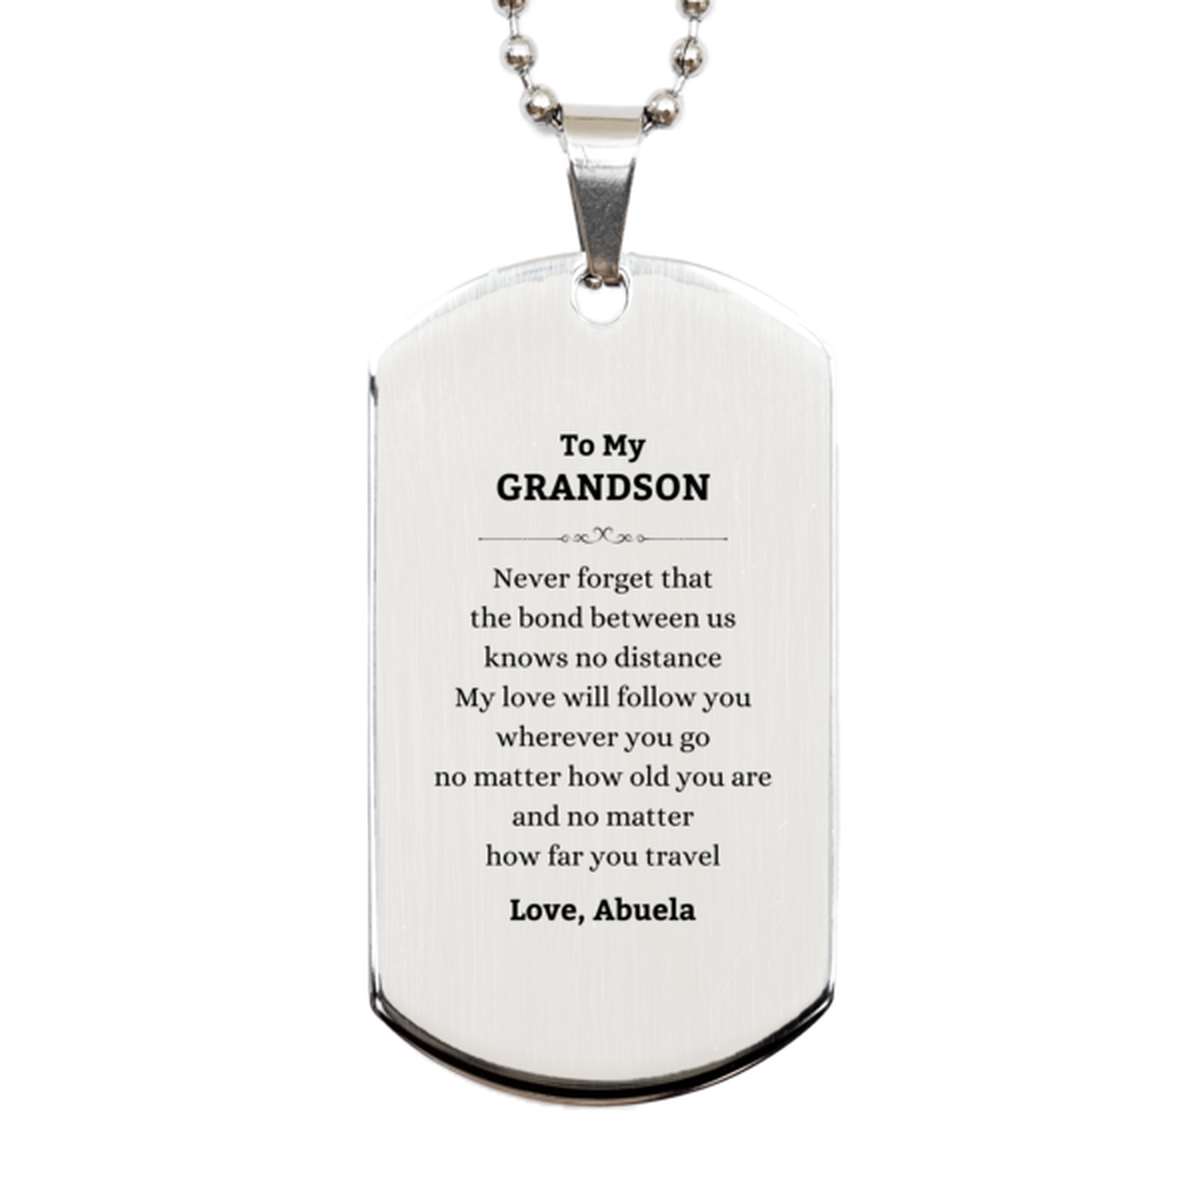 Grandson Birthday Gifts from Abuela, Adjustable Silver Dog Tag for Grandson Christmas Graduation Unique Gifts Grandson Never forget that the bond between us knows no distance. Love, Abuela